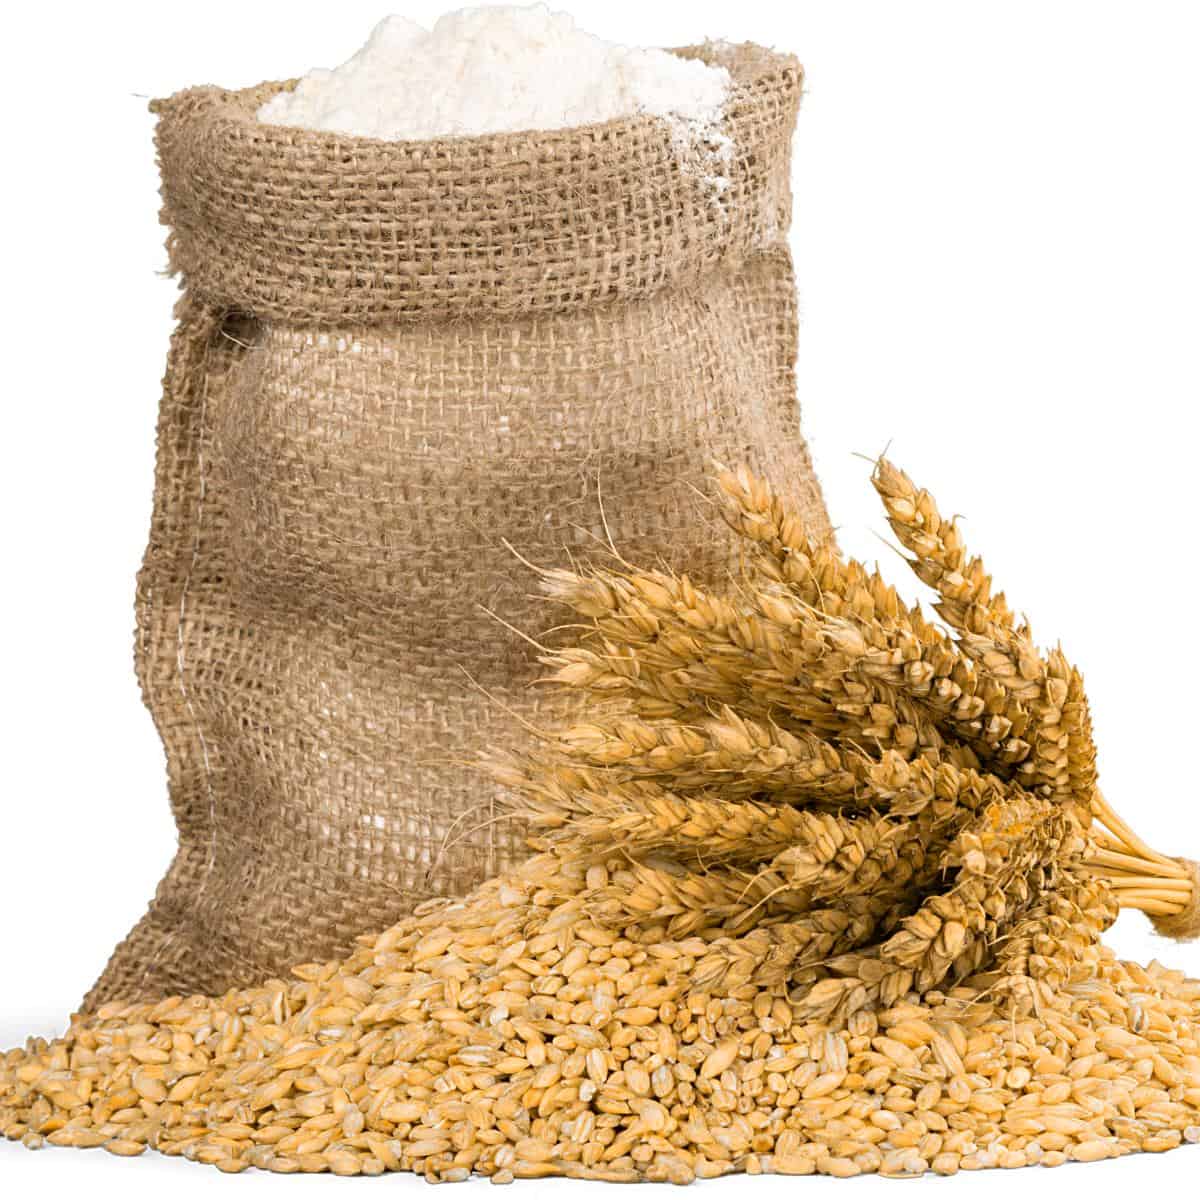 A sack of flour with wheat kernels.